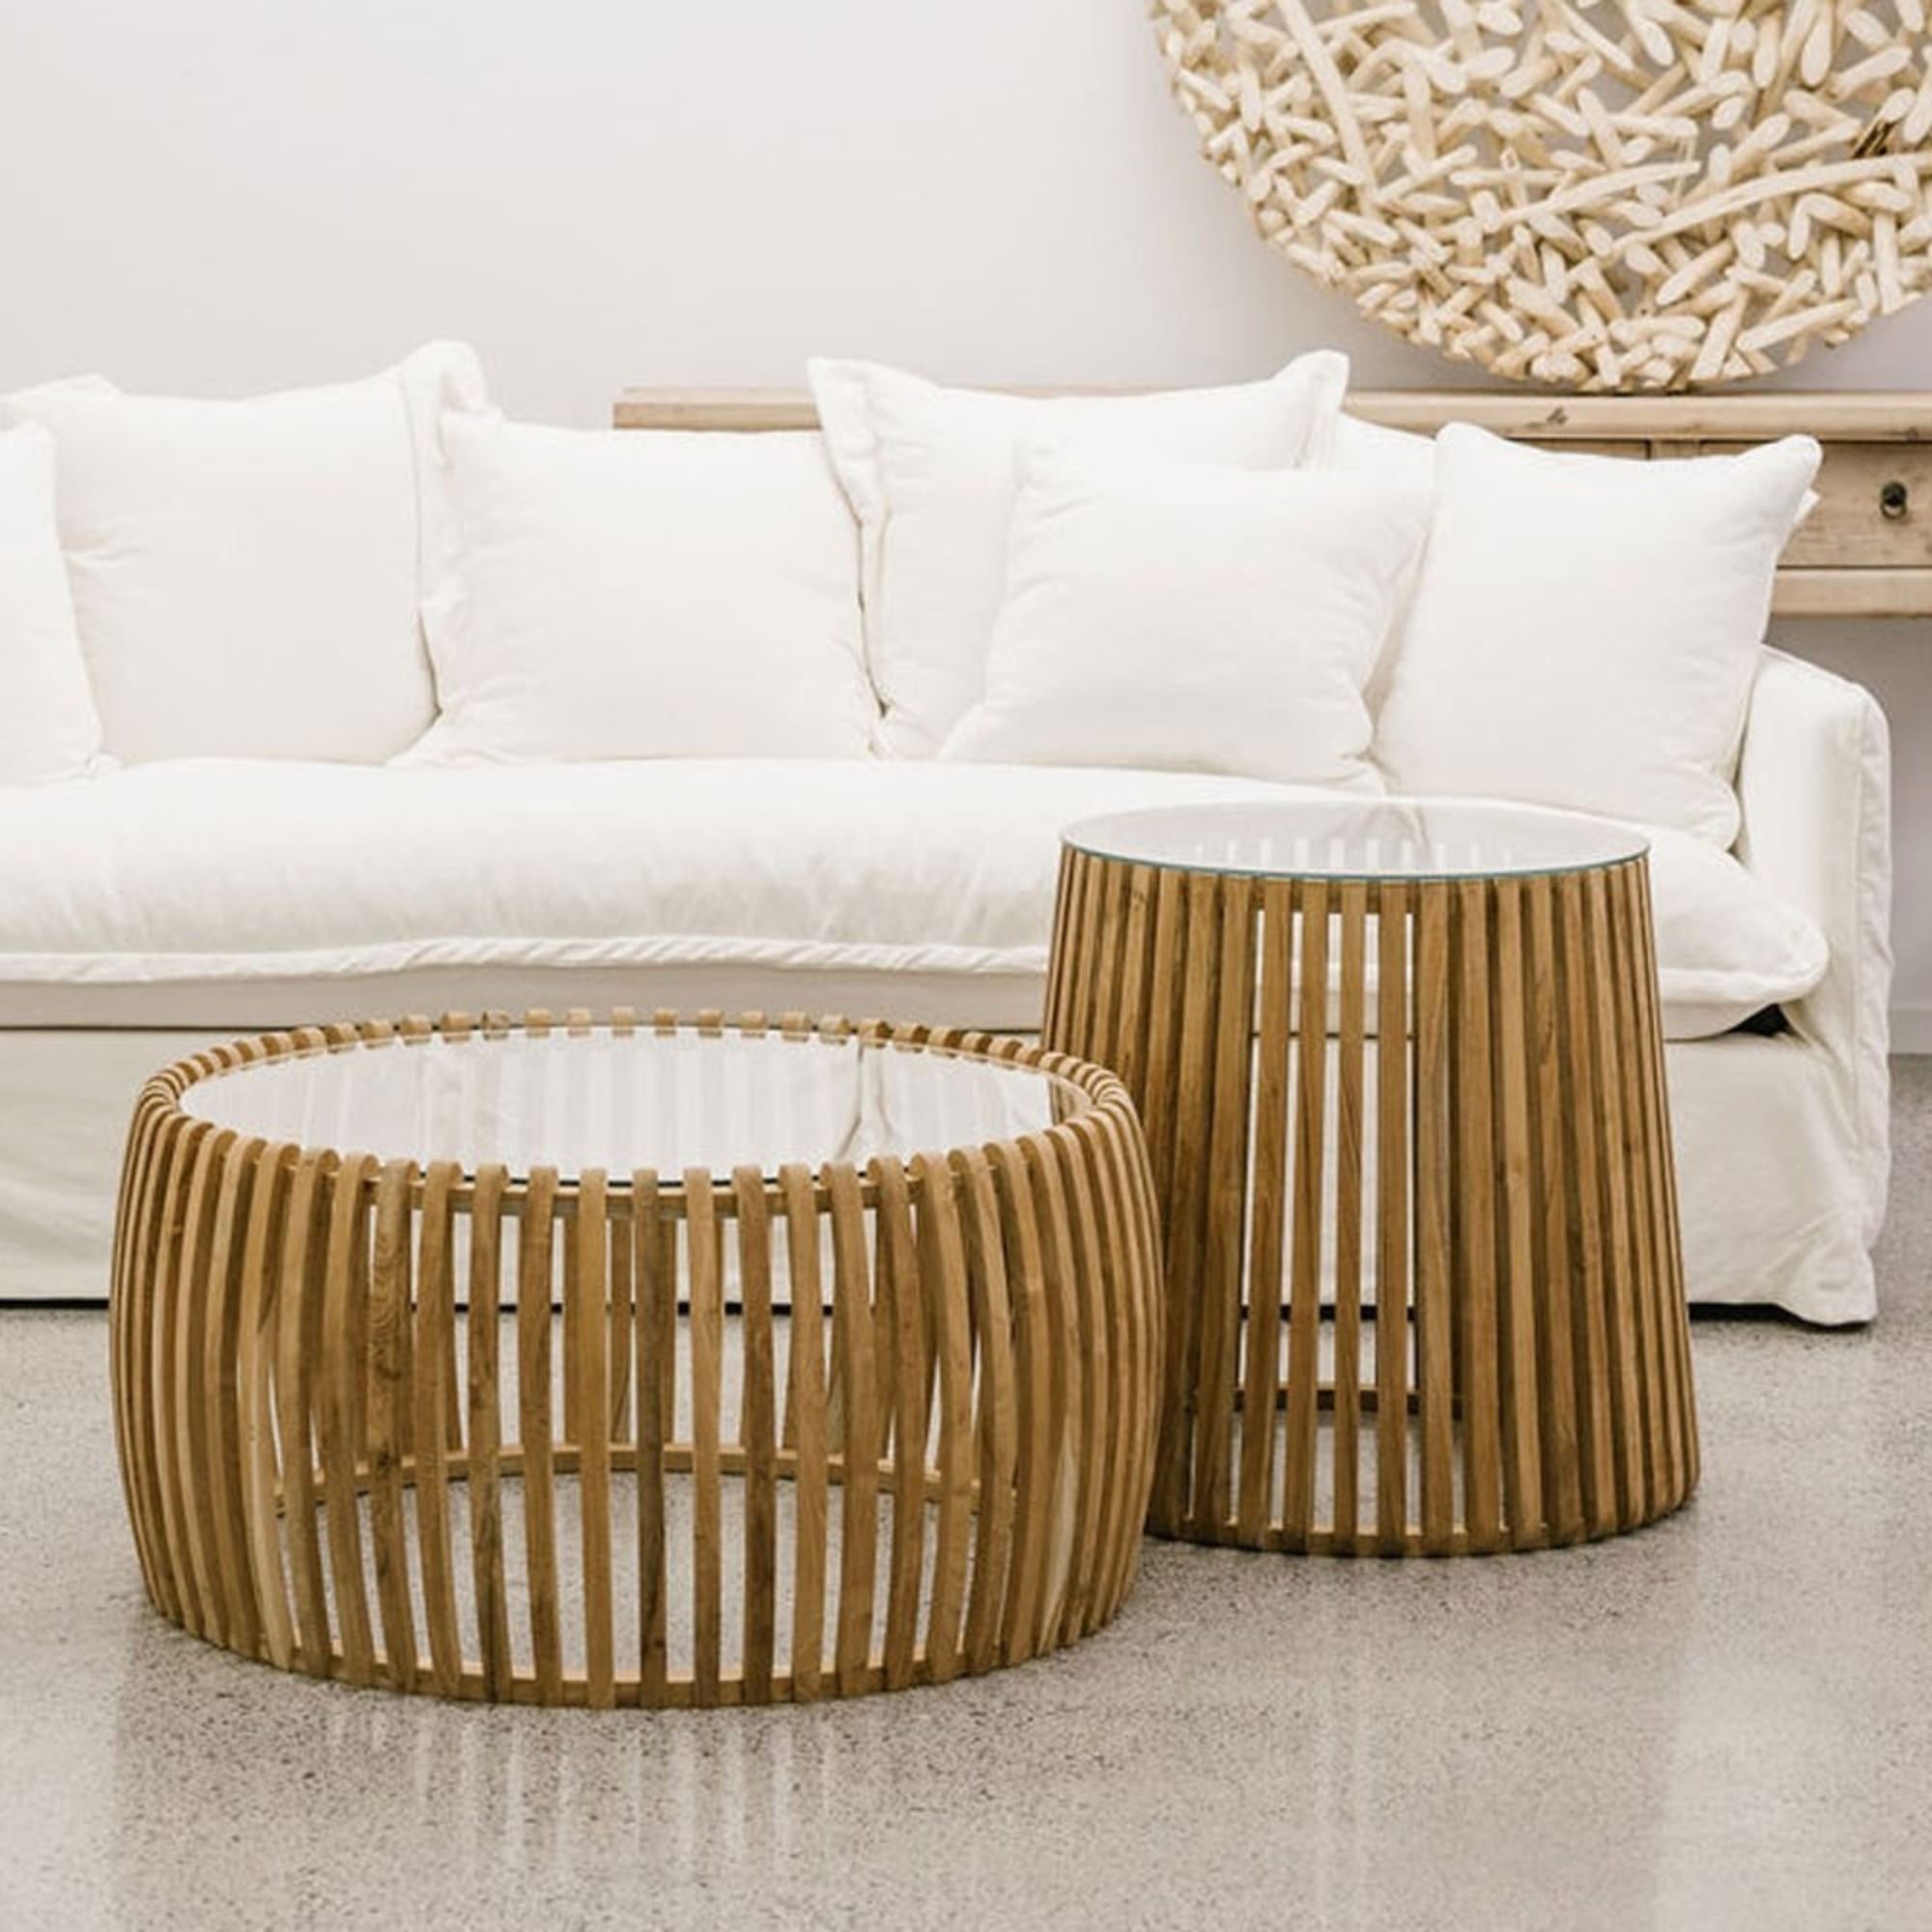 CRUSOE ROUND SLATTED SIDE TABLE | 2 COLOURS